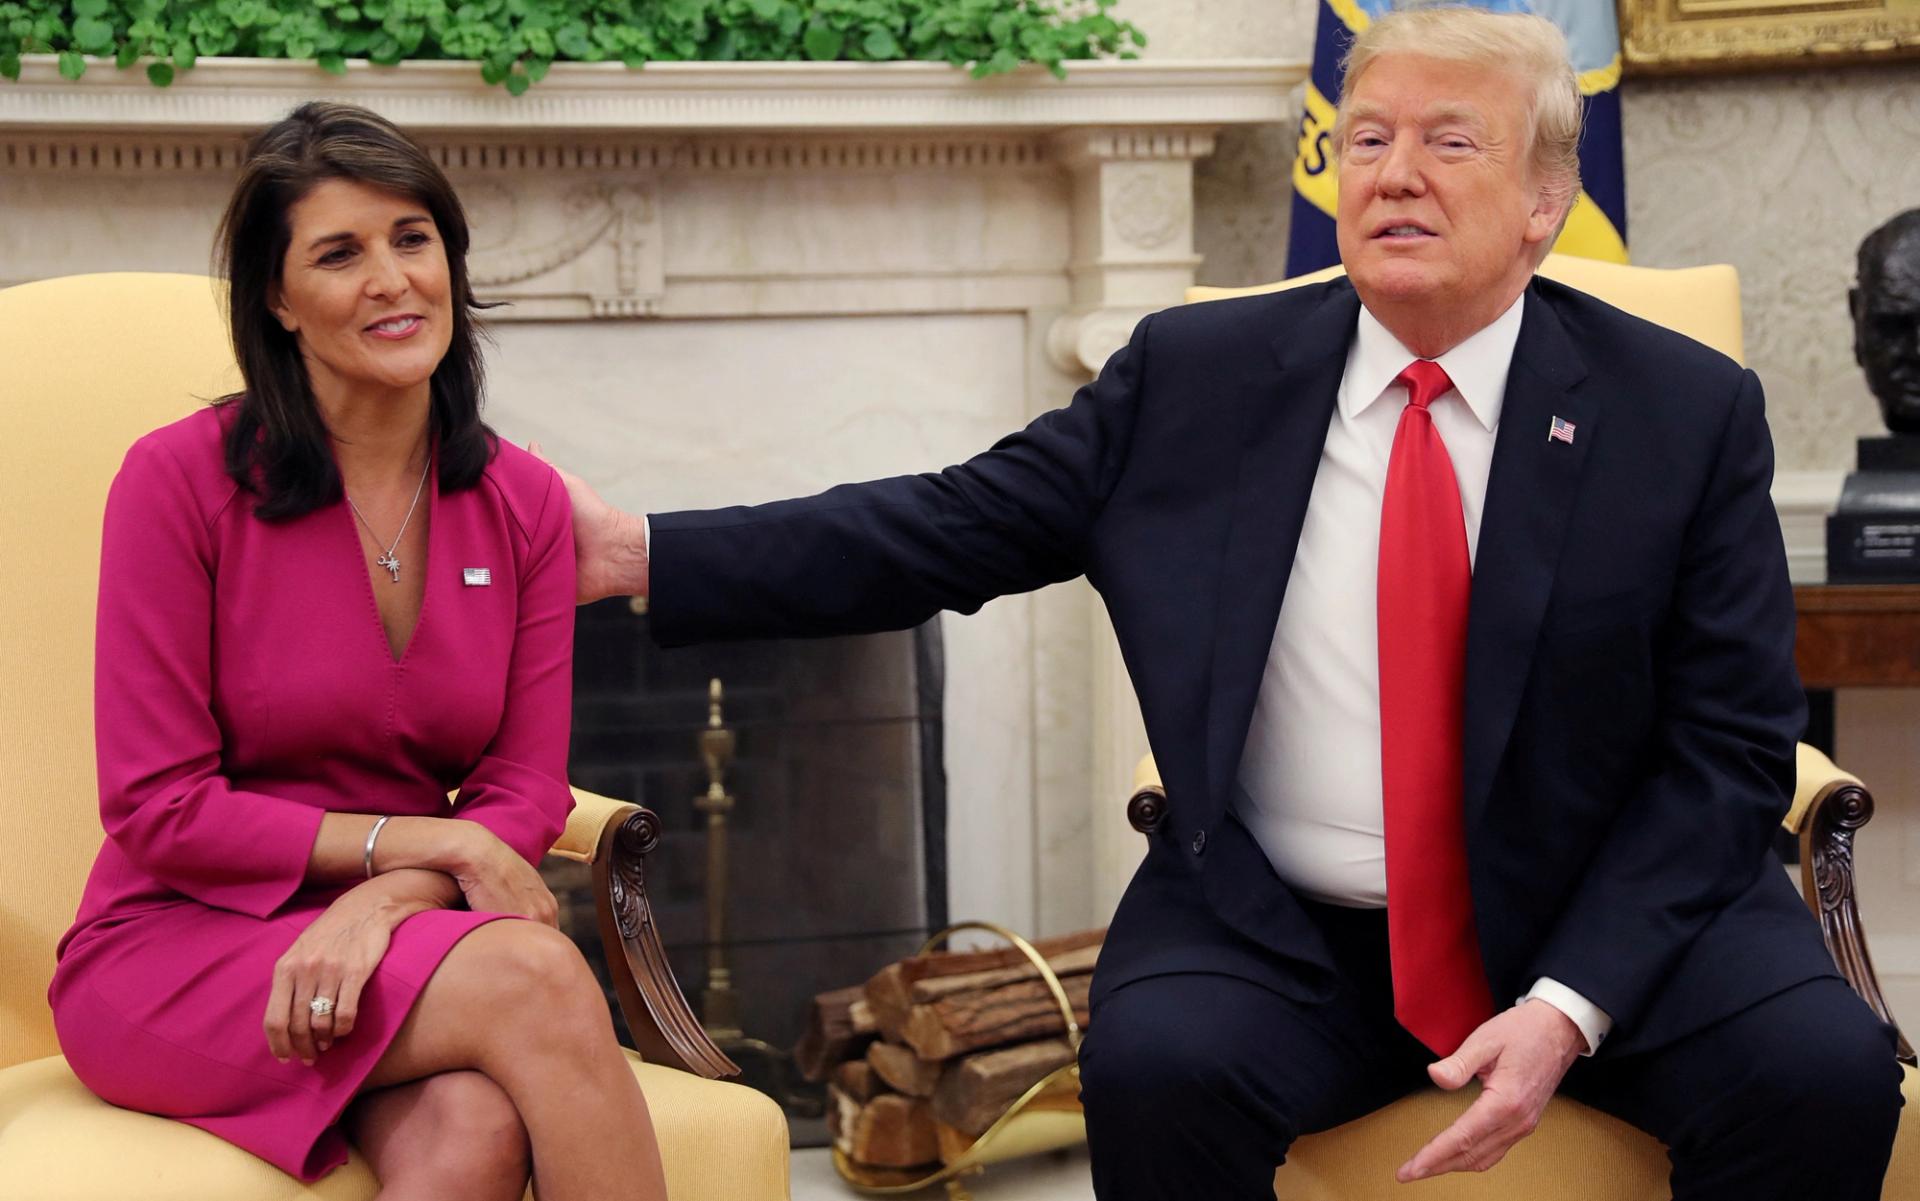 Nikki Haley and Donald Trump in 2018.